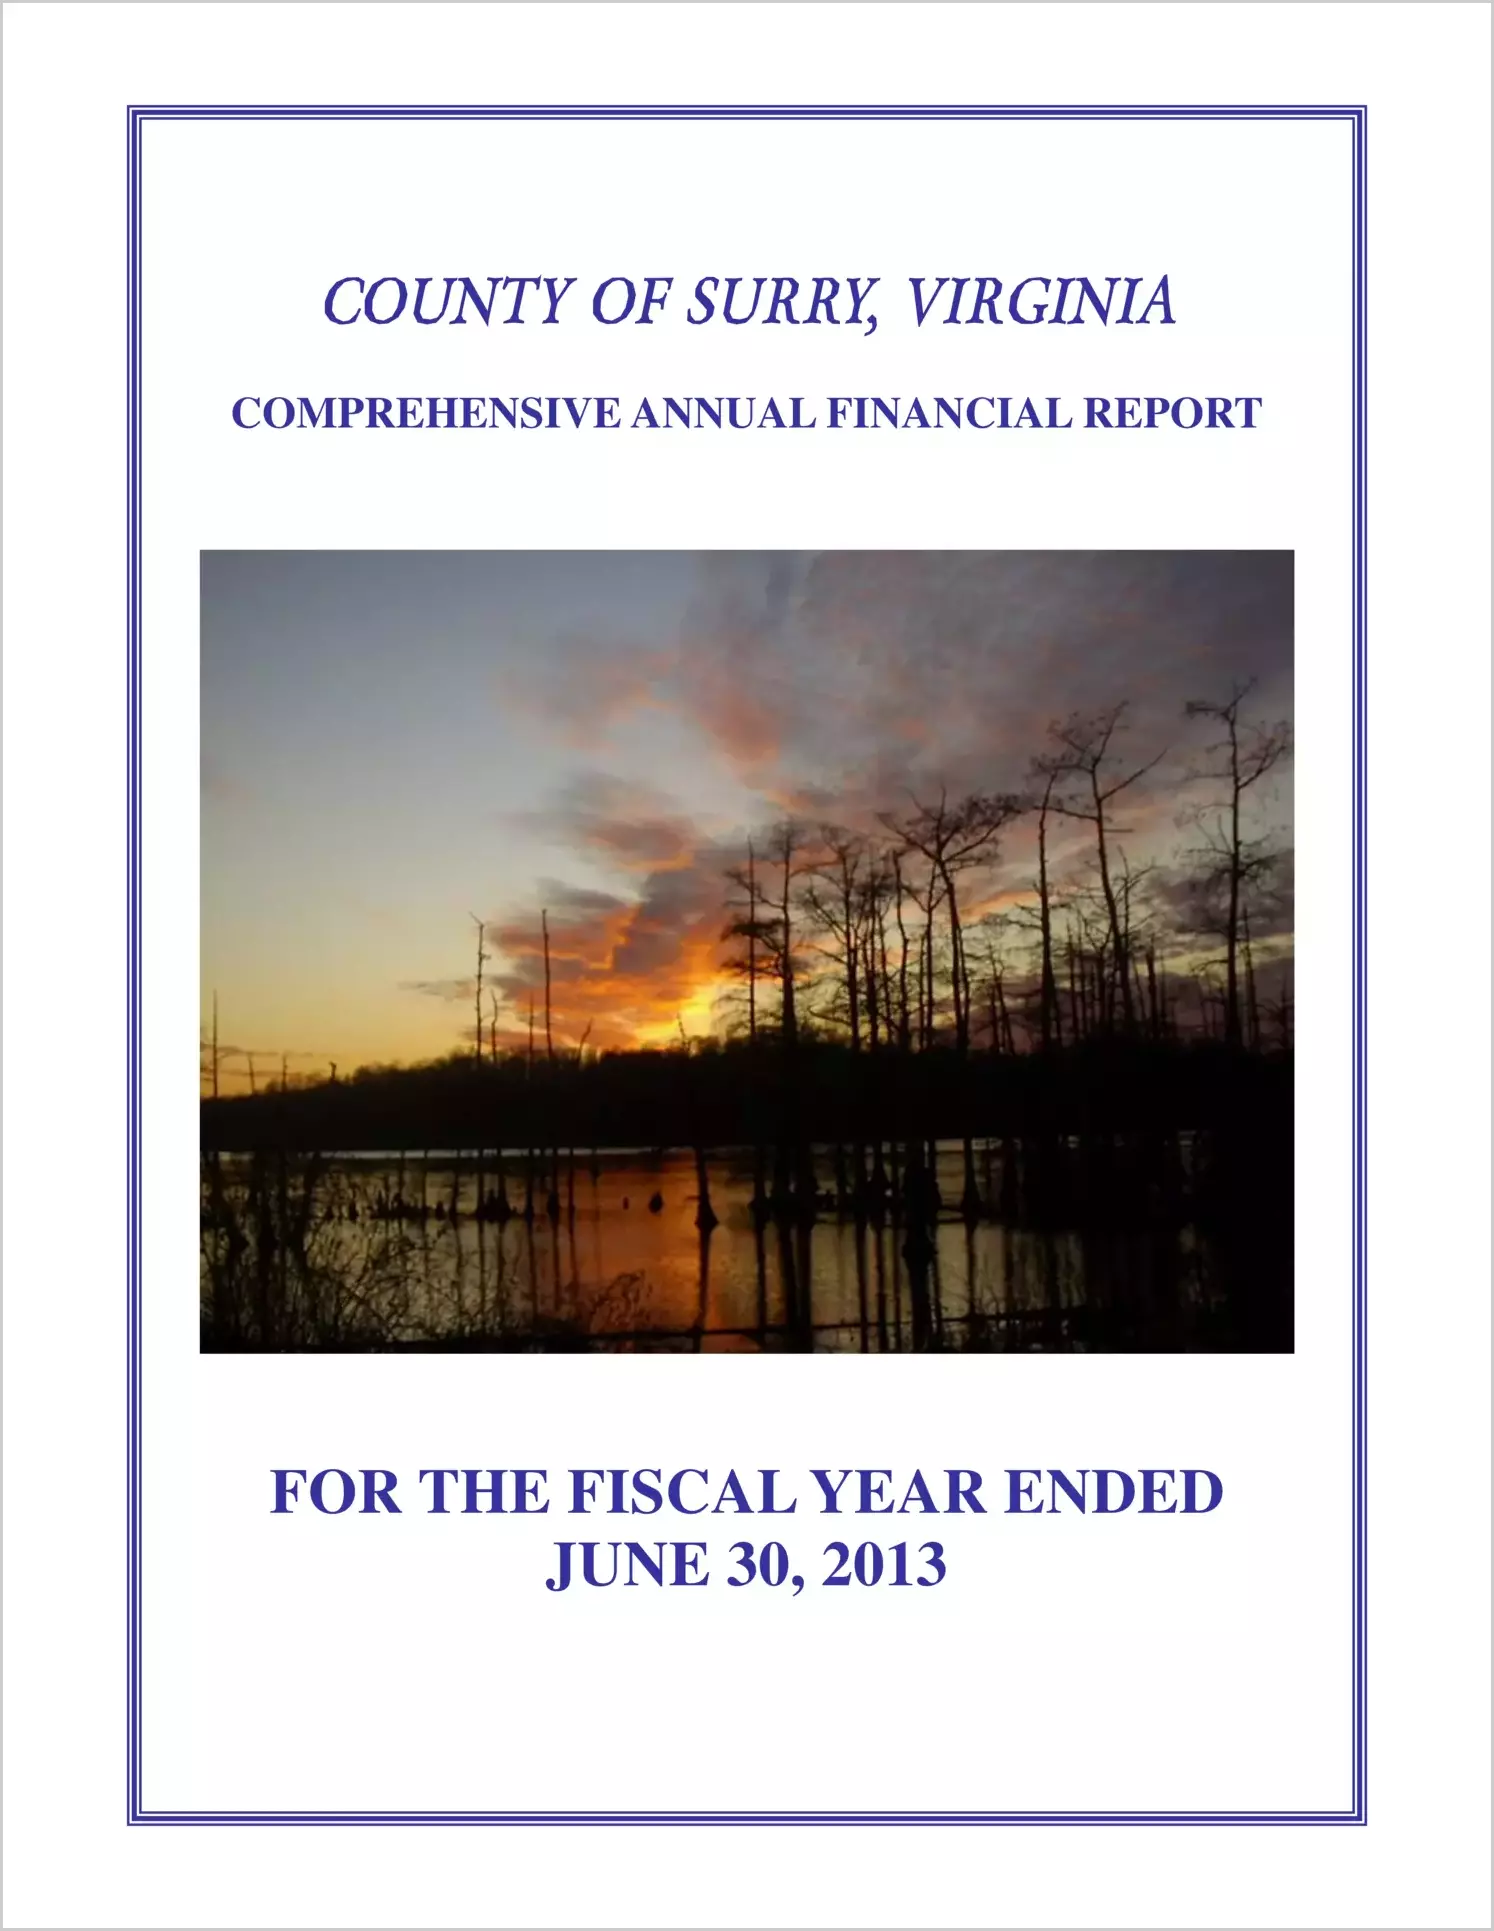 2013 Annual Financial Report for County of Surry